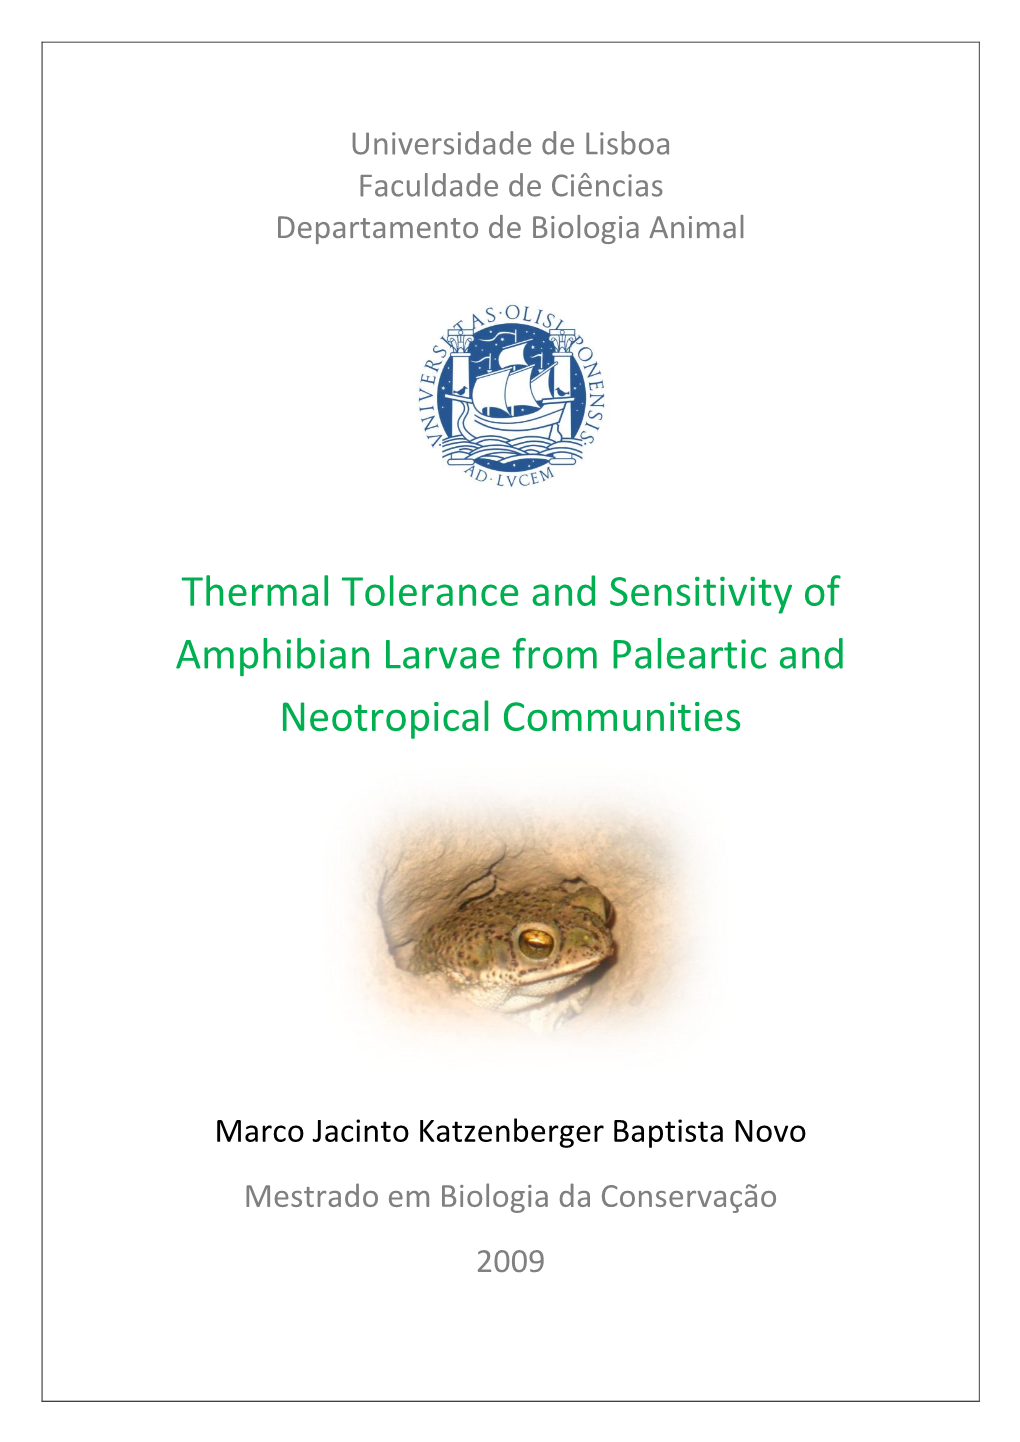 Thermal Tolerance and Sensitivity of Amphibian Larvae from Paleartic and Neotropical Communities